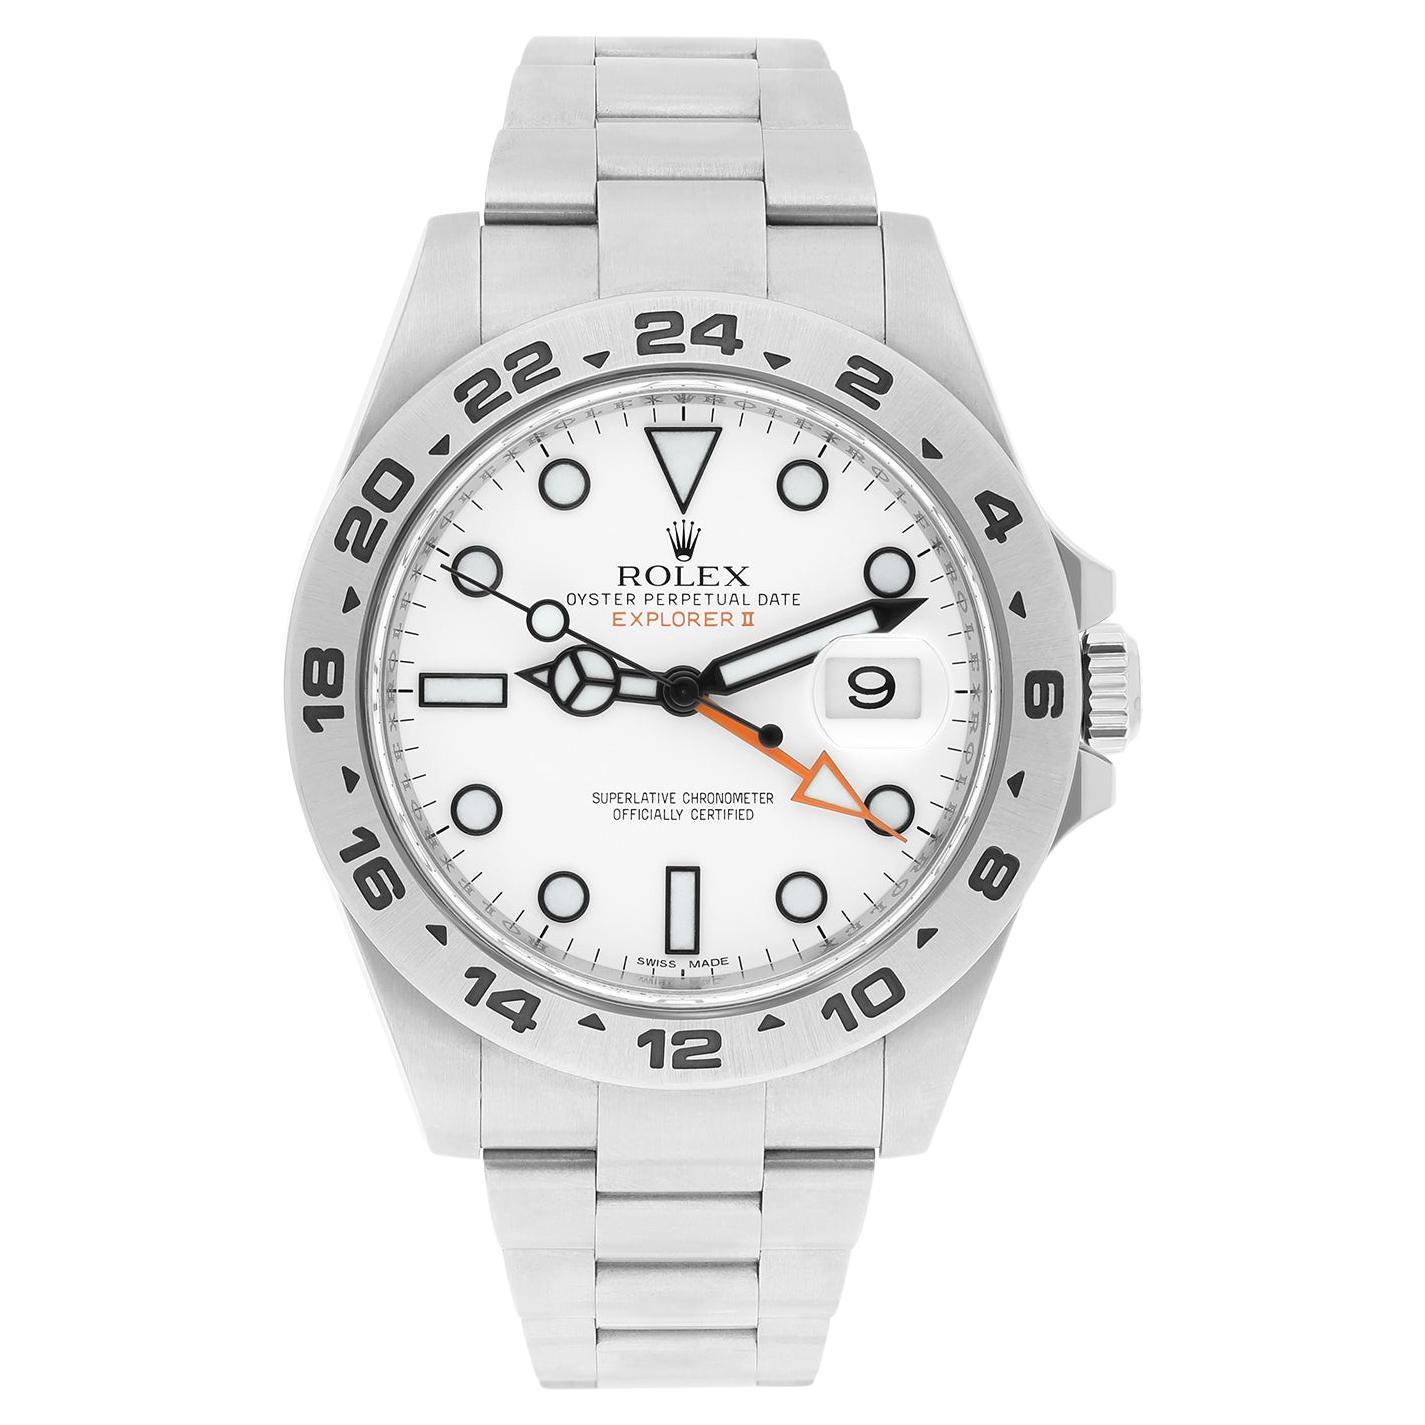 Silver-tone stainless steel case with a silver-tone stainless steel oyster bracelet. Fixed silver-tone stainless steel bezel. White dial with luminous black hands and index hour markers. Minute markers around the outer rim. Luminescent hands and